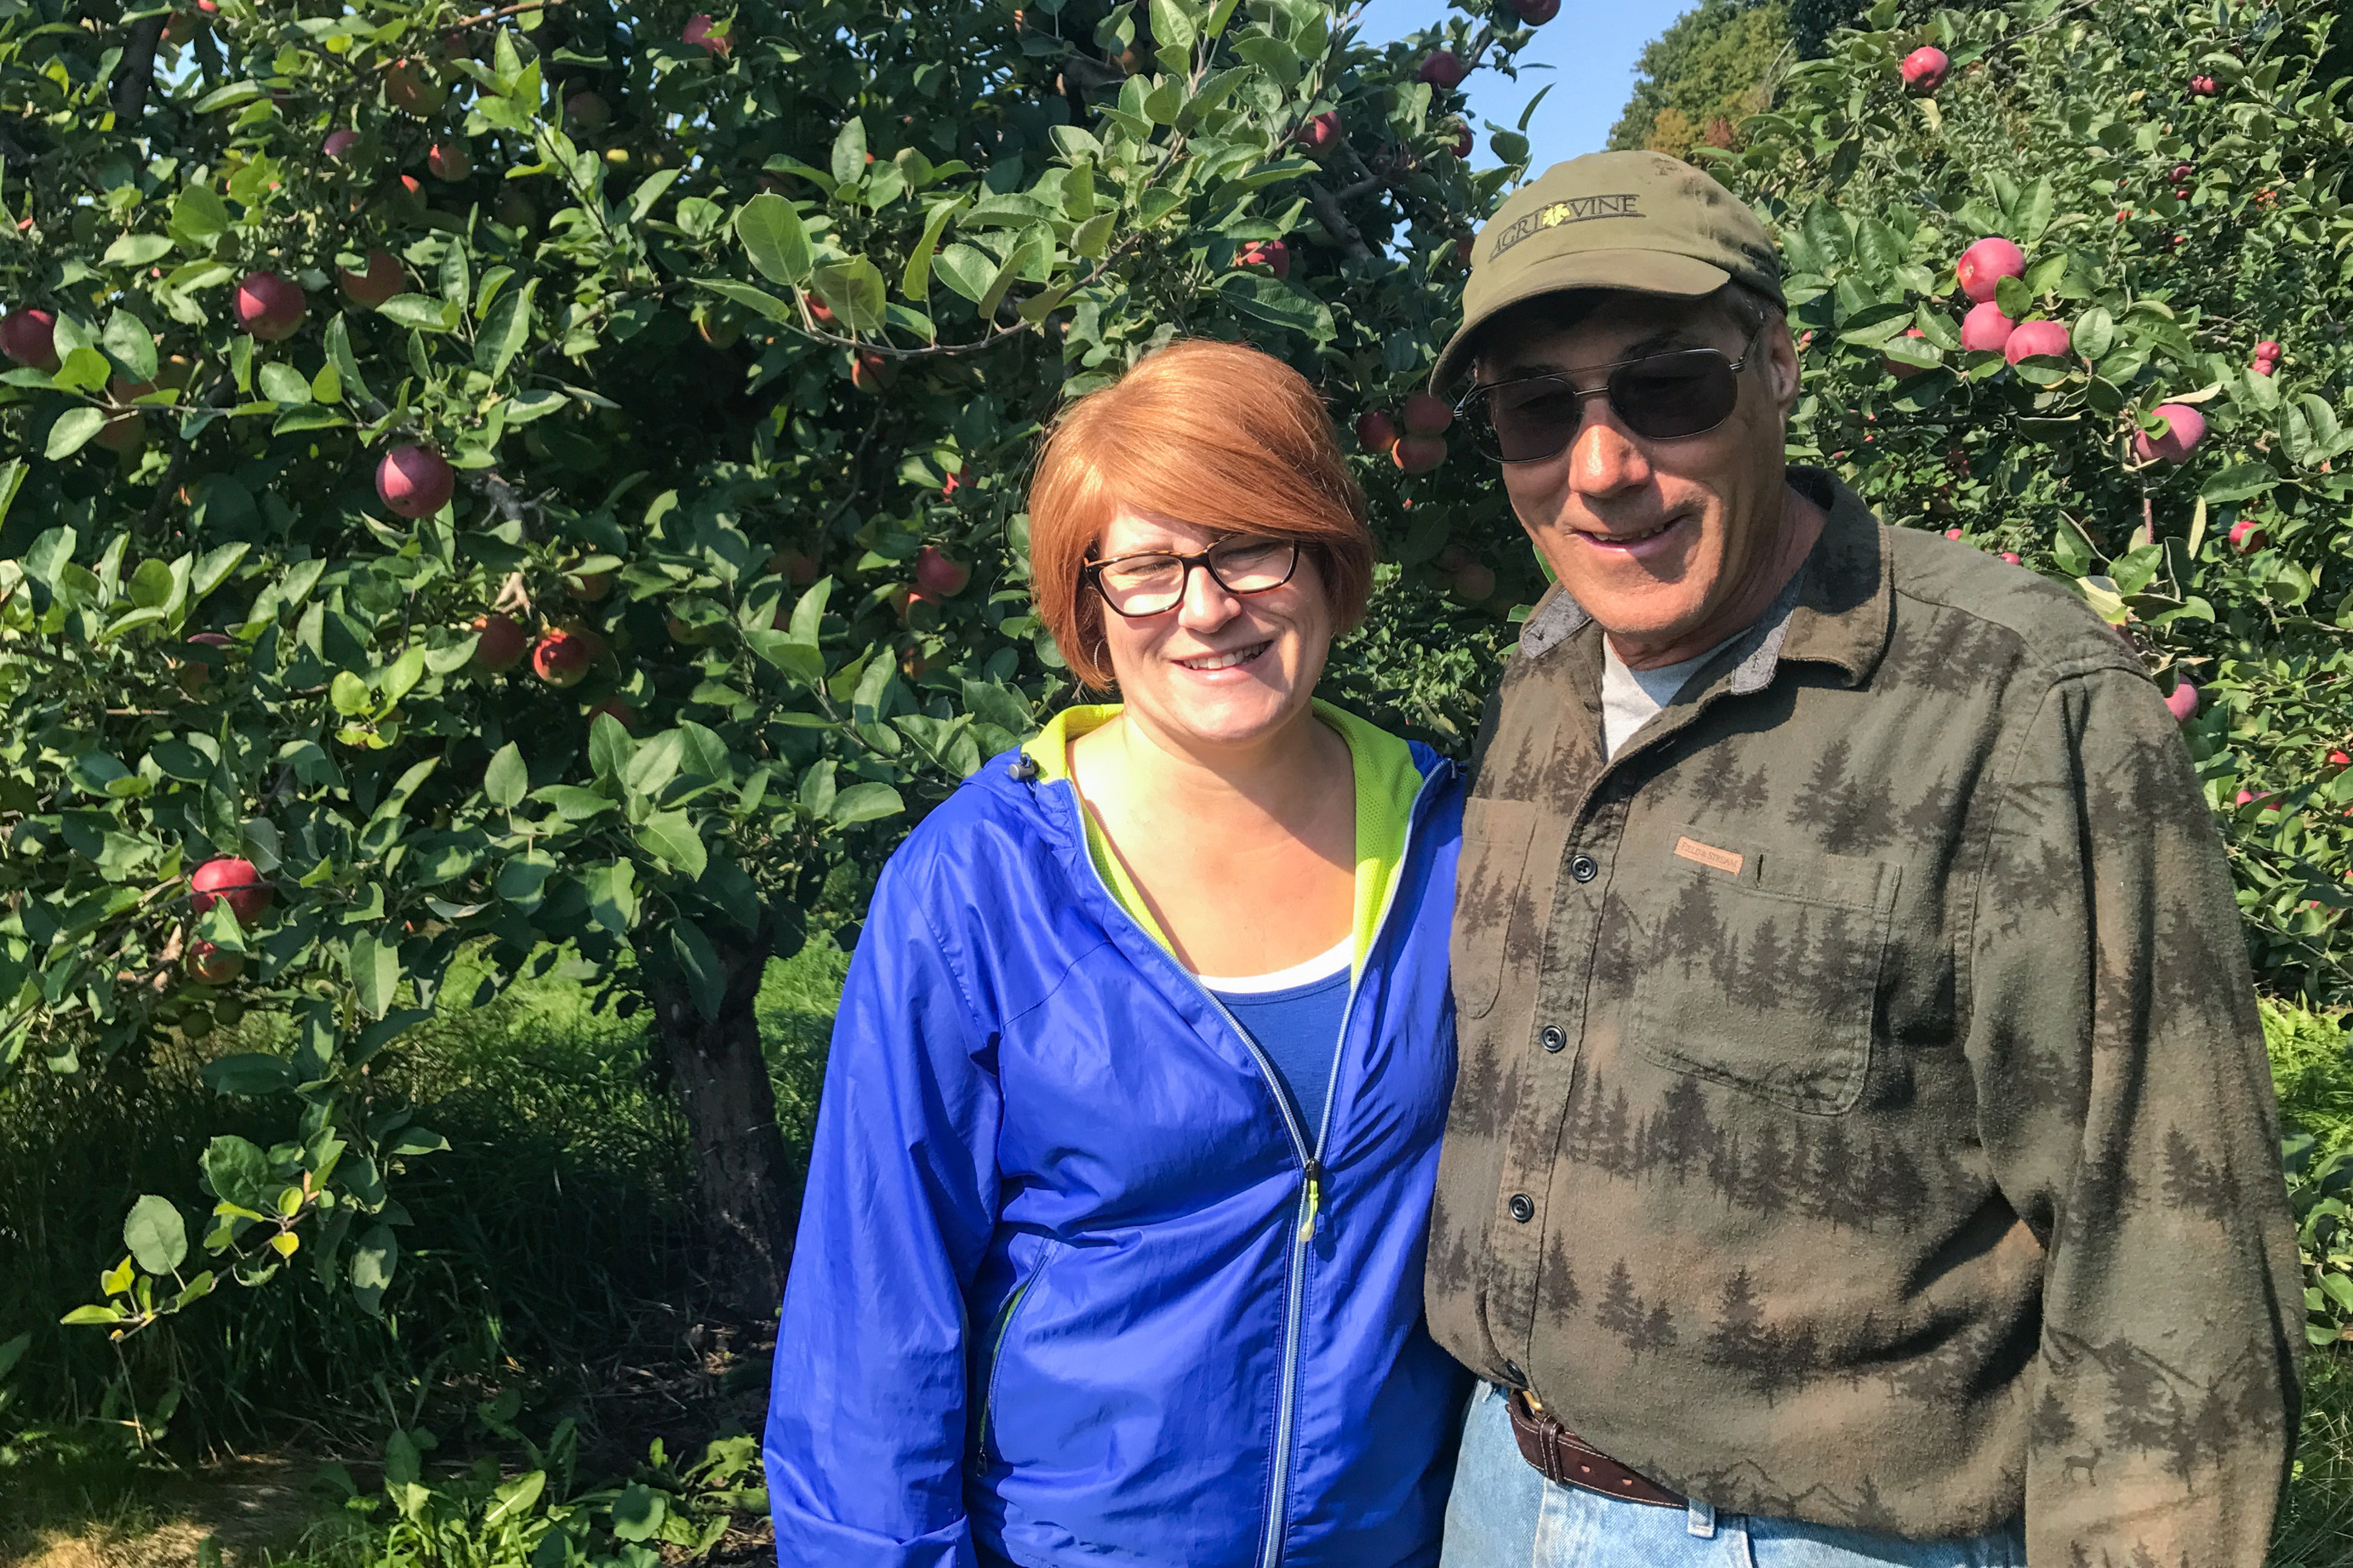 Farm manager Heatherlyn Johnson Reamer is pictured with her father, Dean Johnson, who owns Johnson Farms. Without migrant workers to pick the crops, Reamer says, "There wouldn't be food. It's just as simple as that."